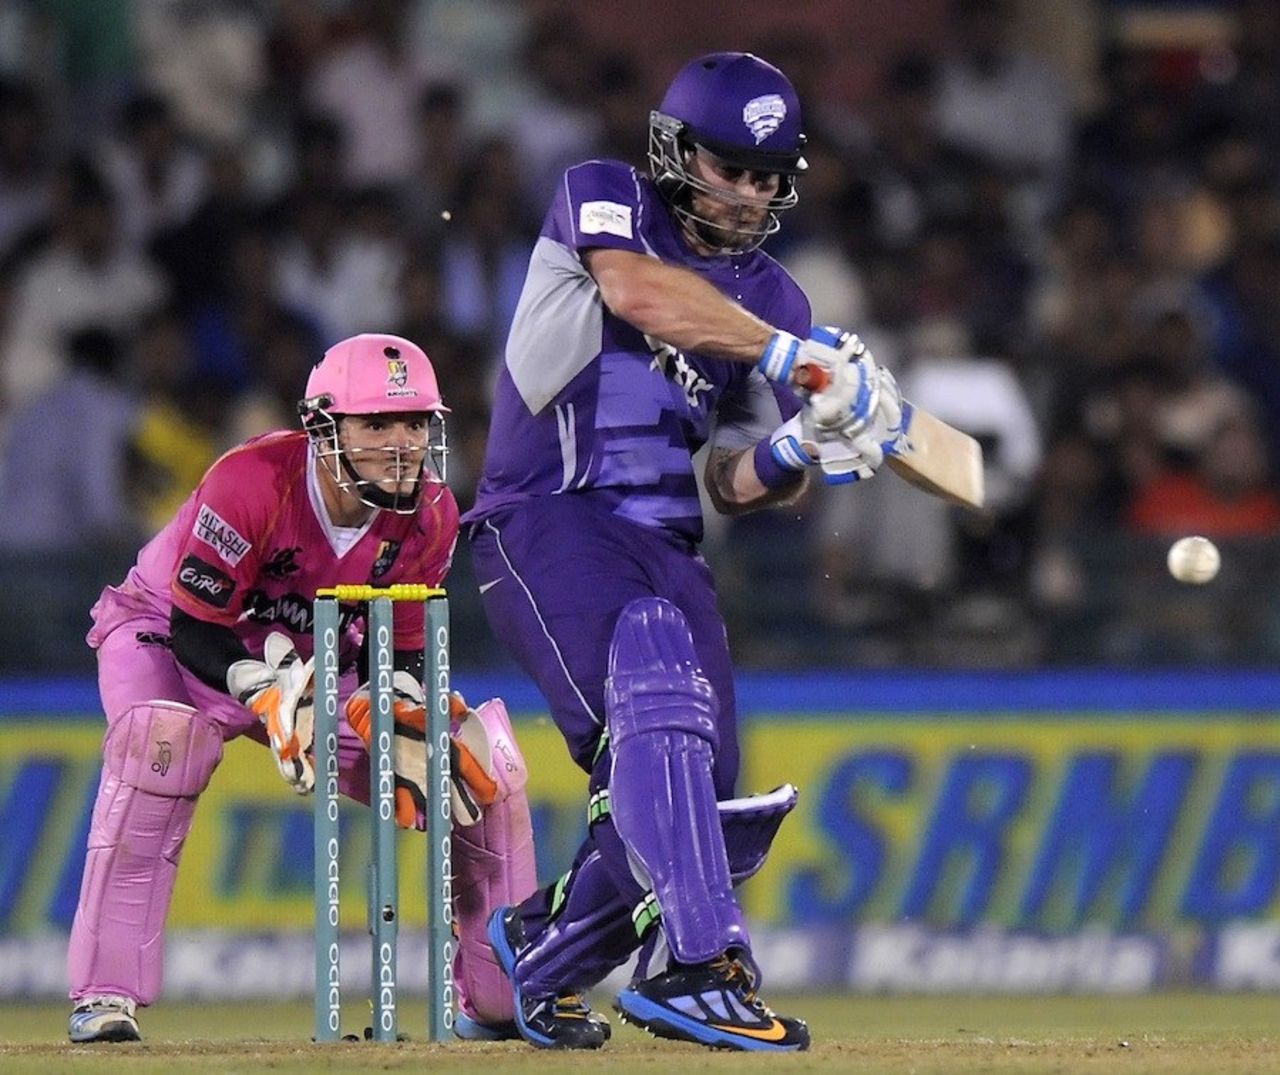 Aiden Blizzard lines up to pull, Hobart Hurricanes v Northern Knights, CLT20, Group B, Raipur, September 23, 2014